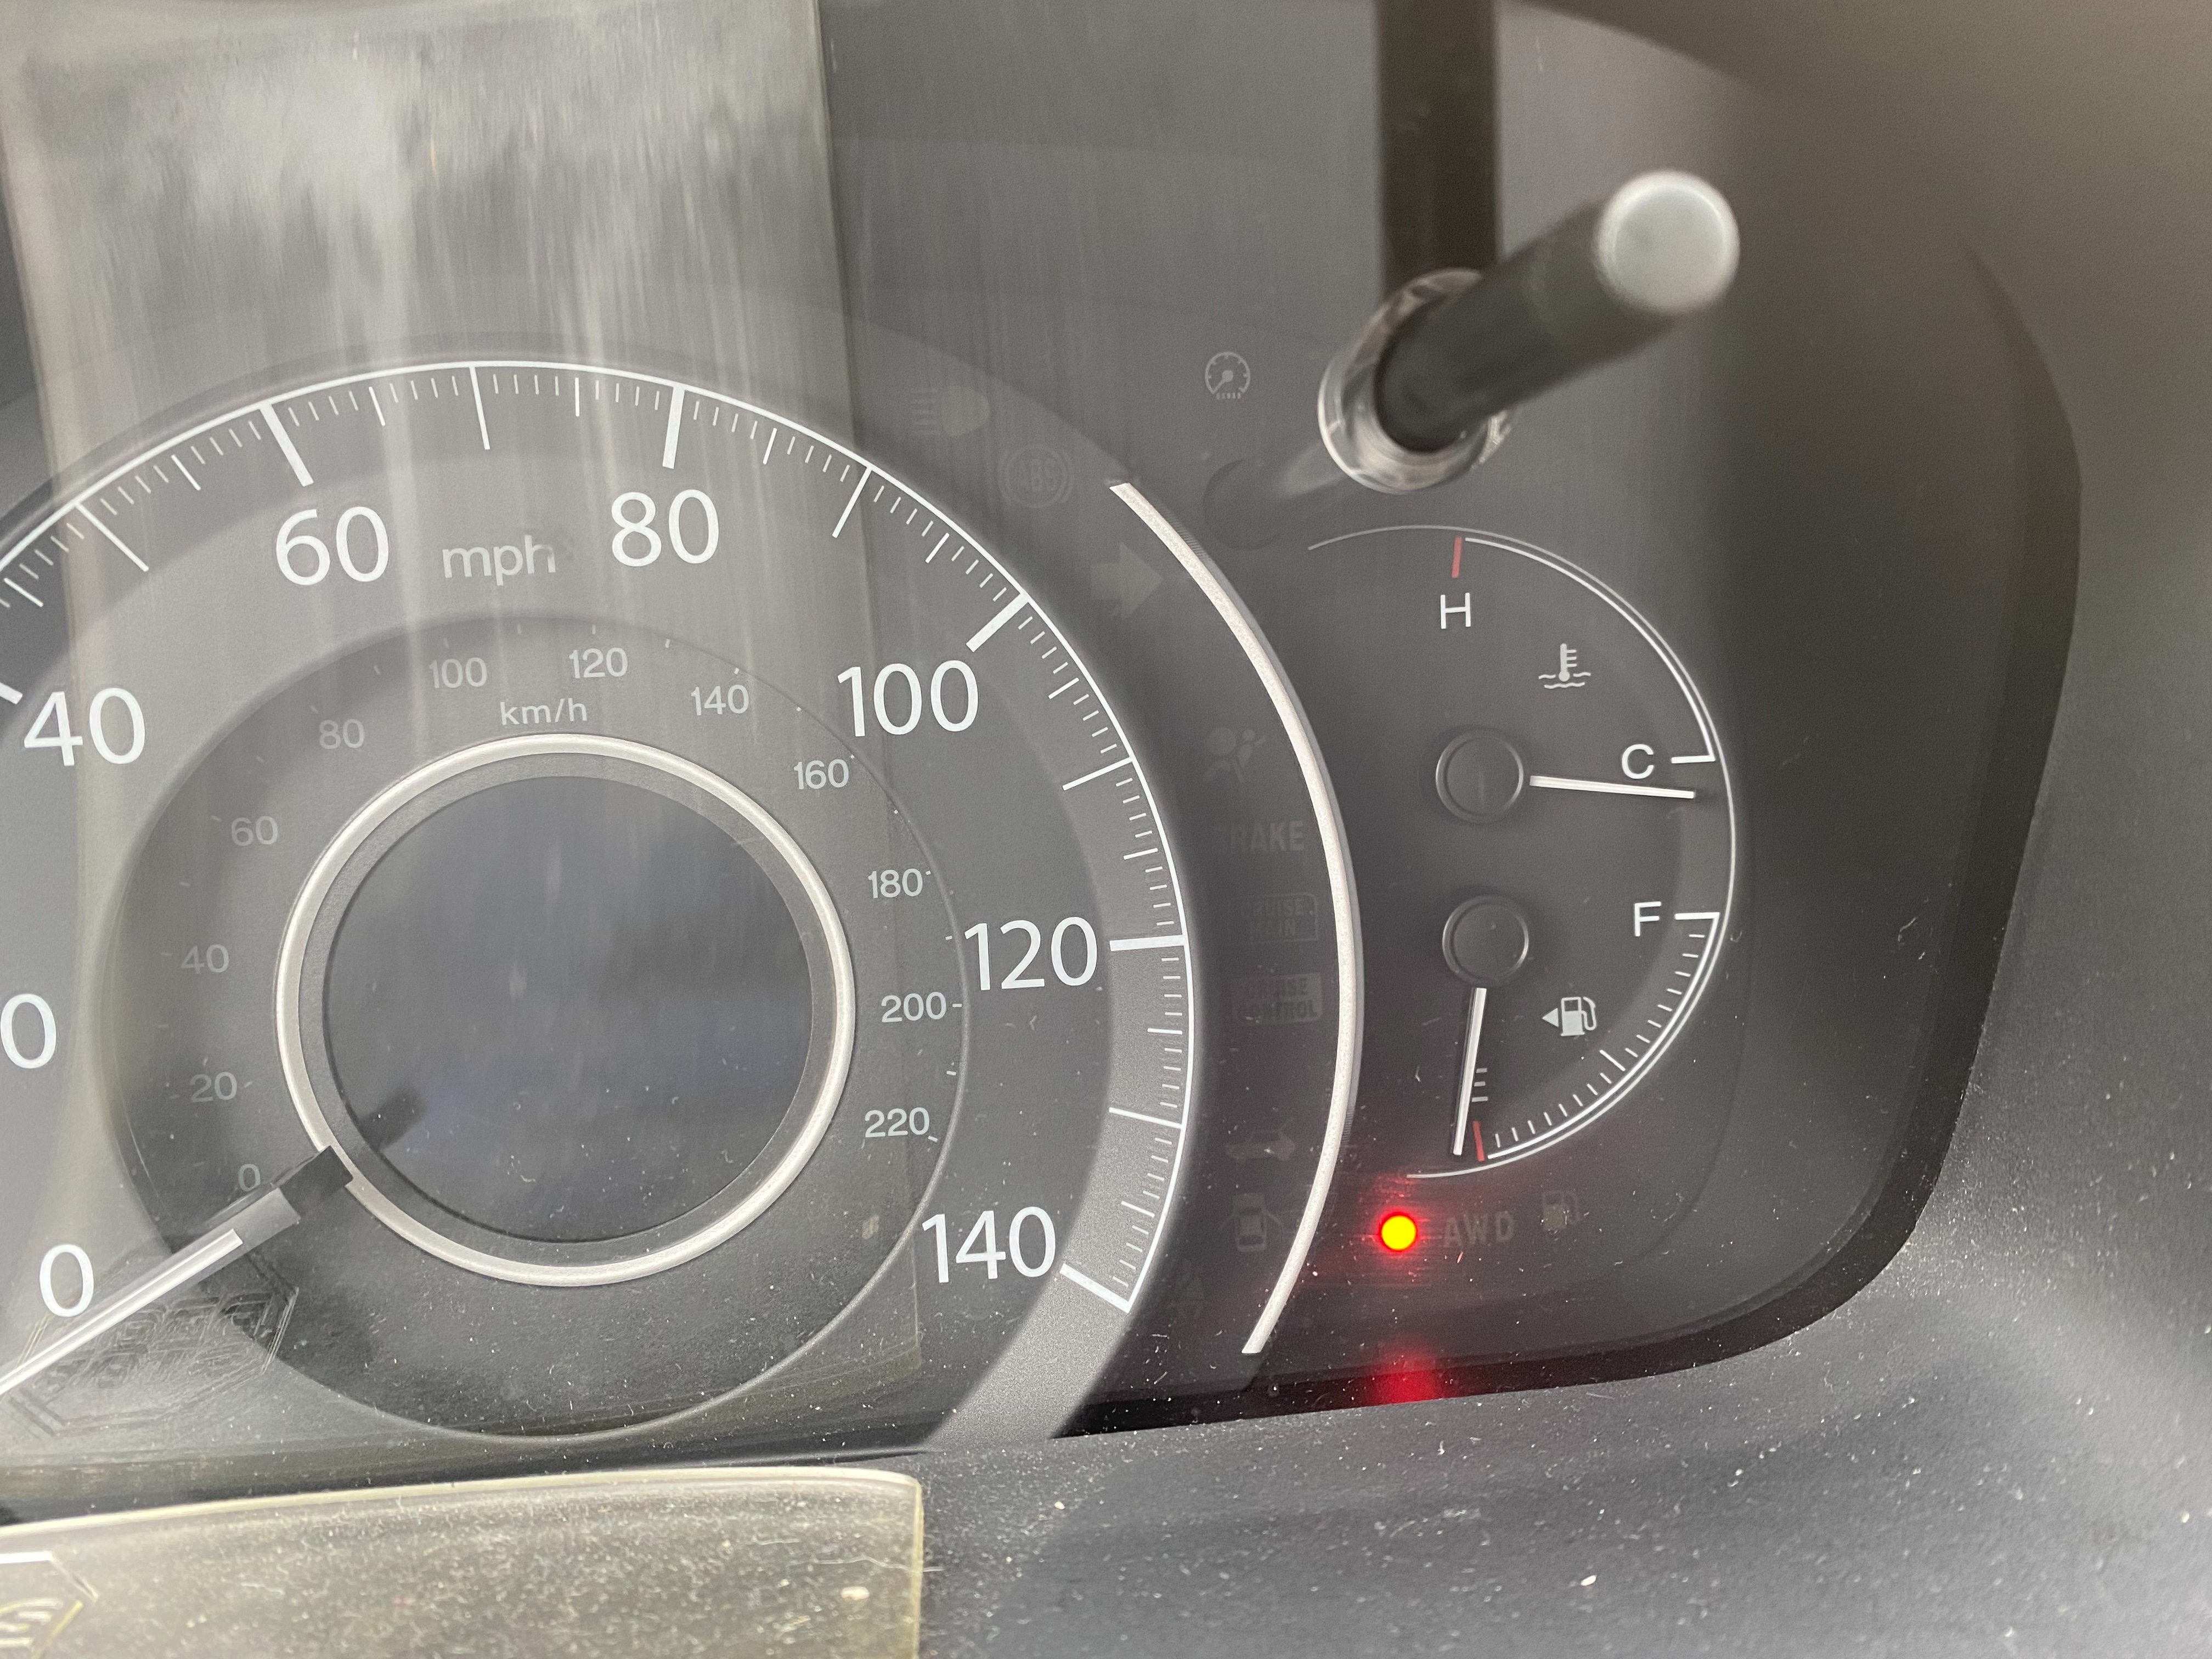 Large Red Dot Blinking On Dashboard